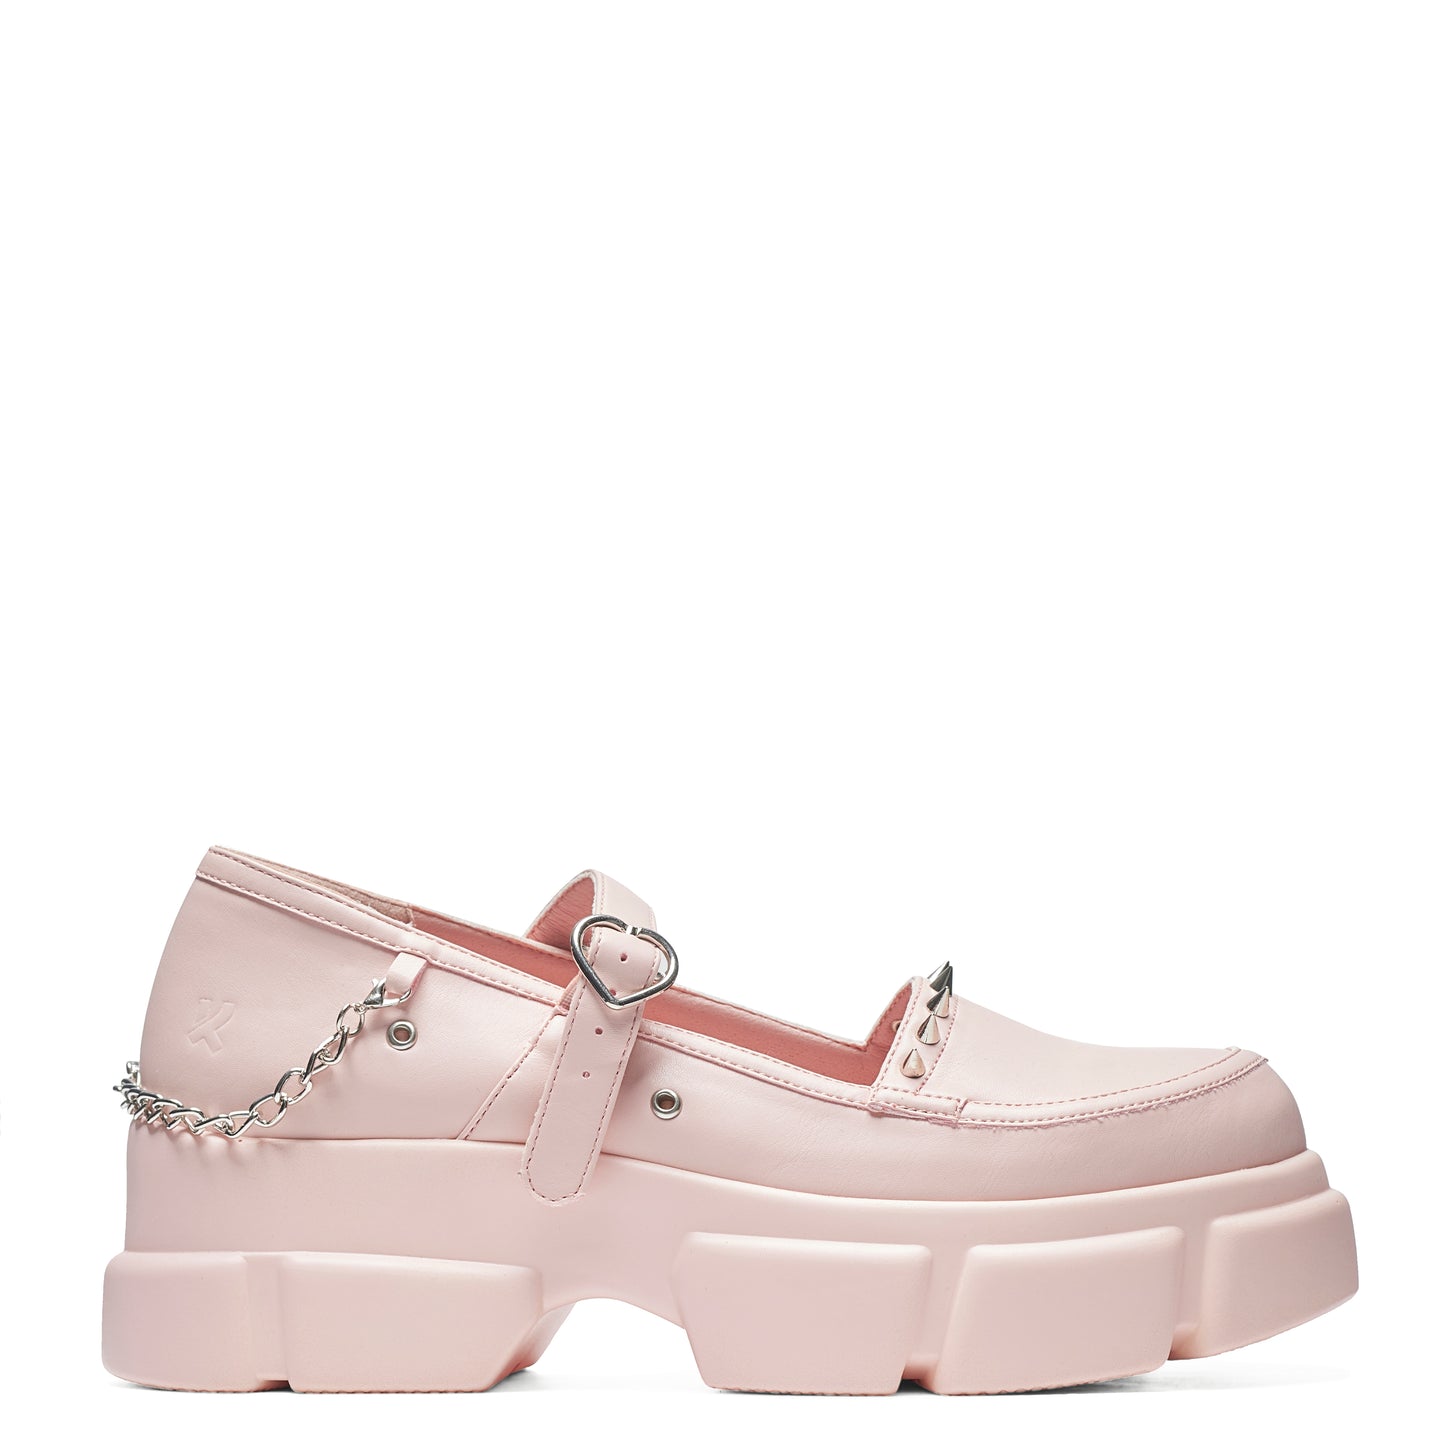 Cloud Mist Chunky Shoes - Baby Pink - Shoes - KOI Footwear - Pink - Side View